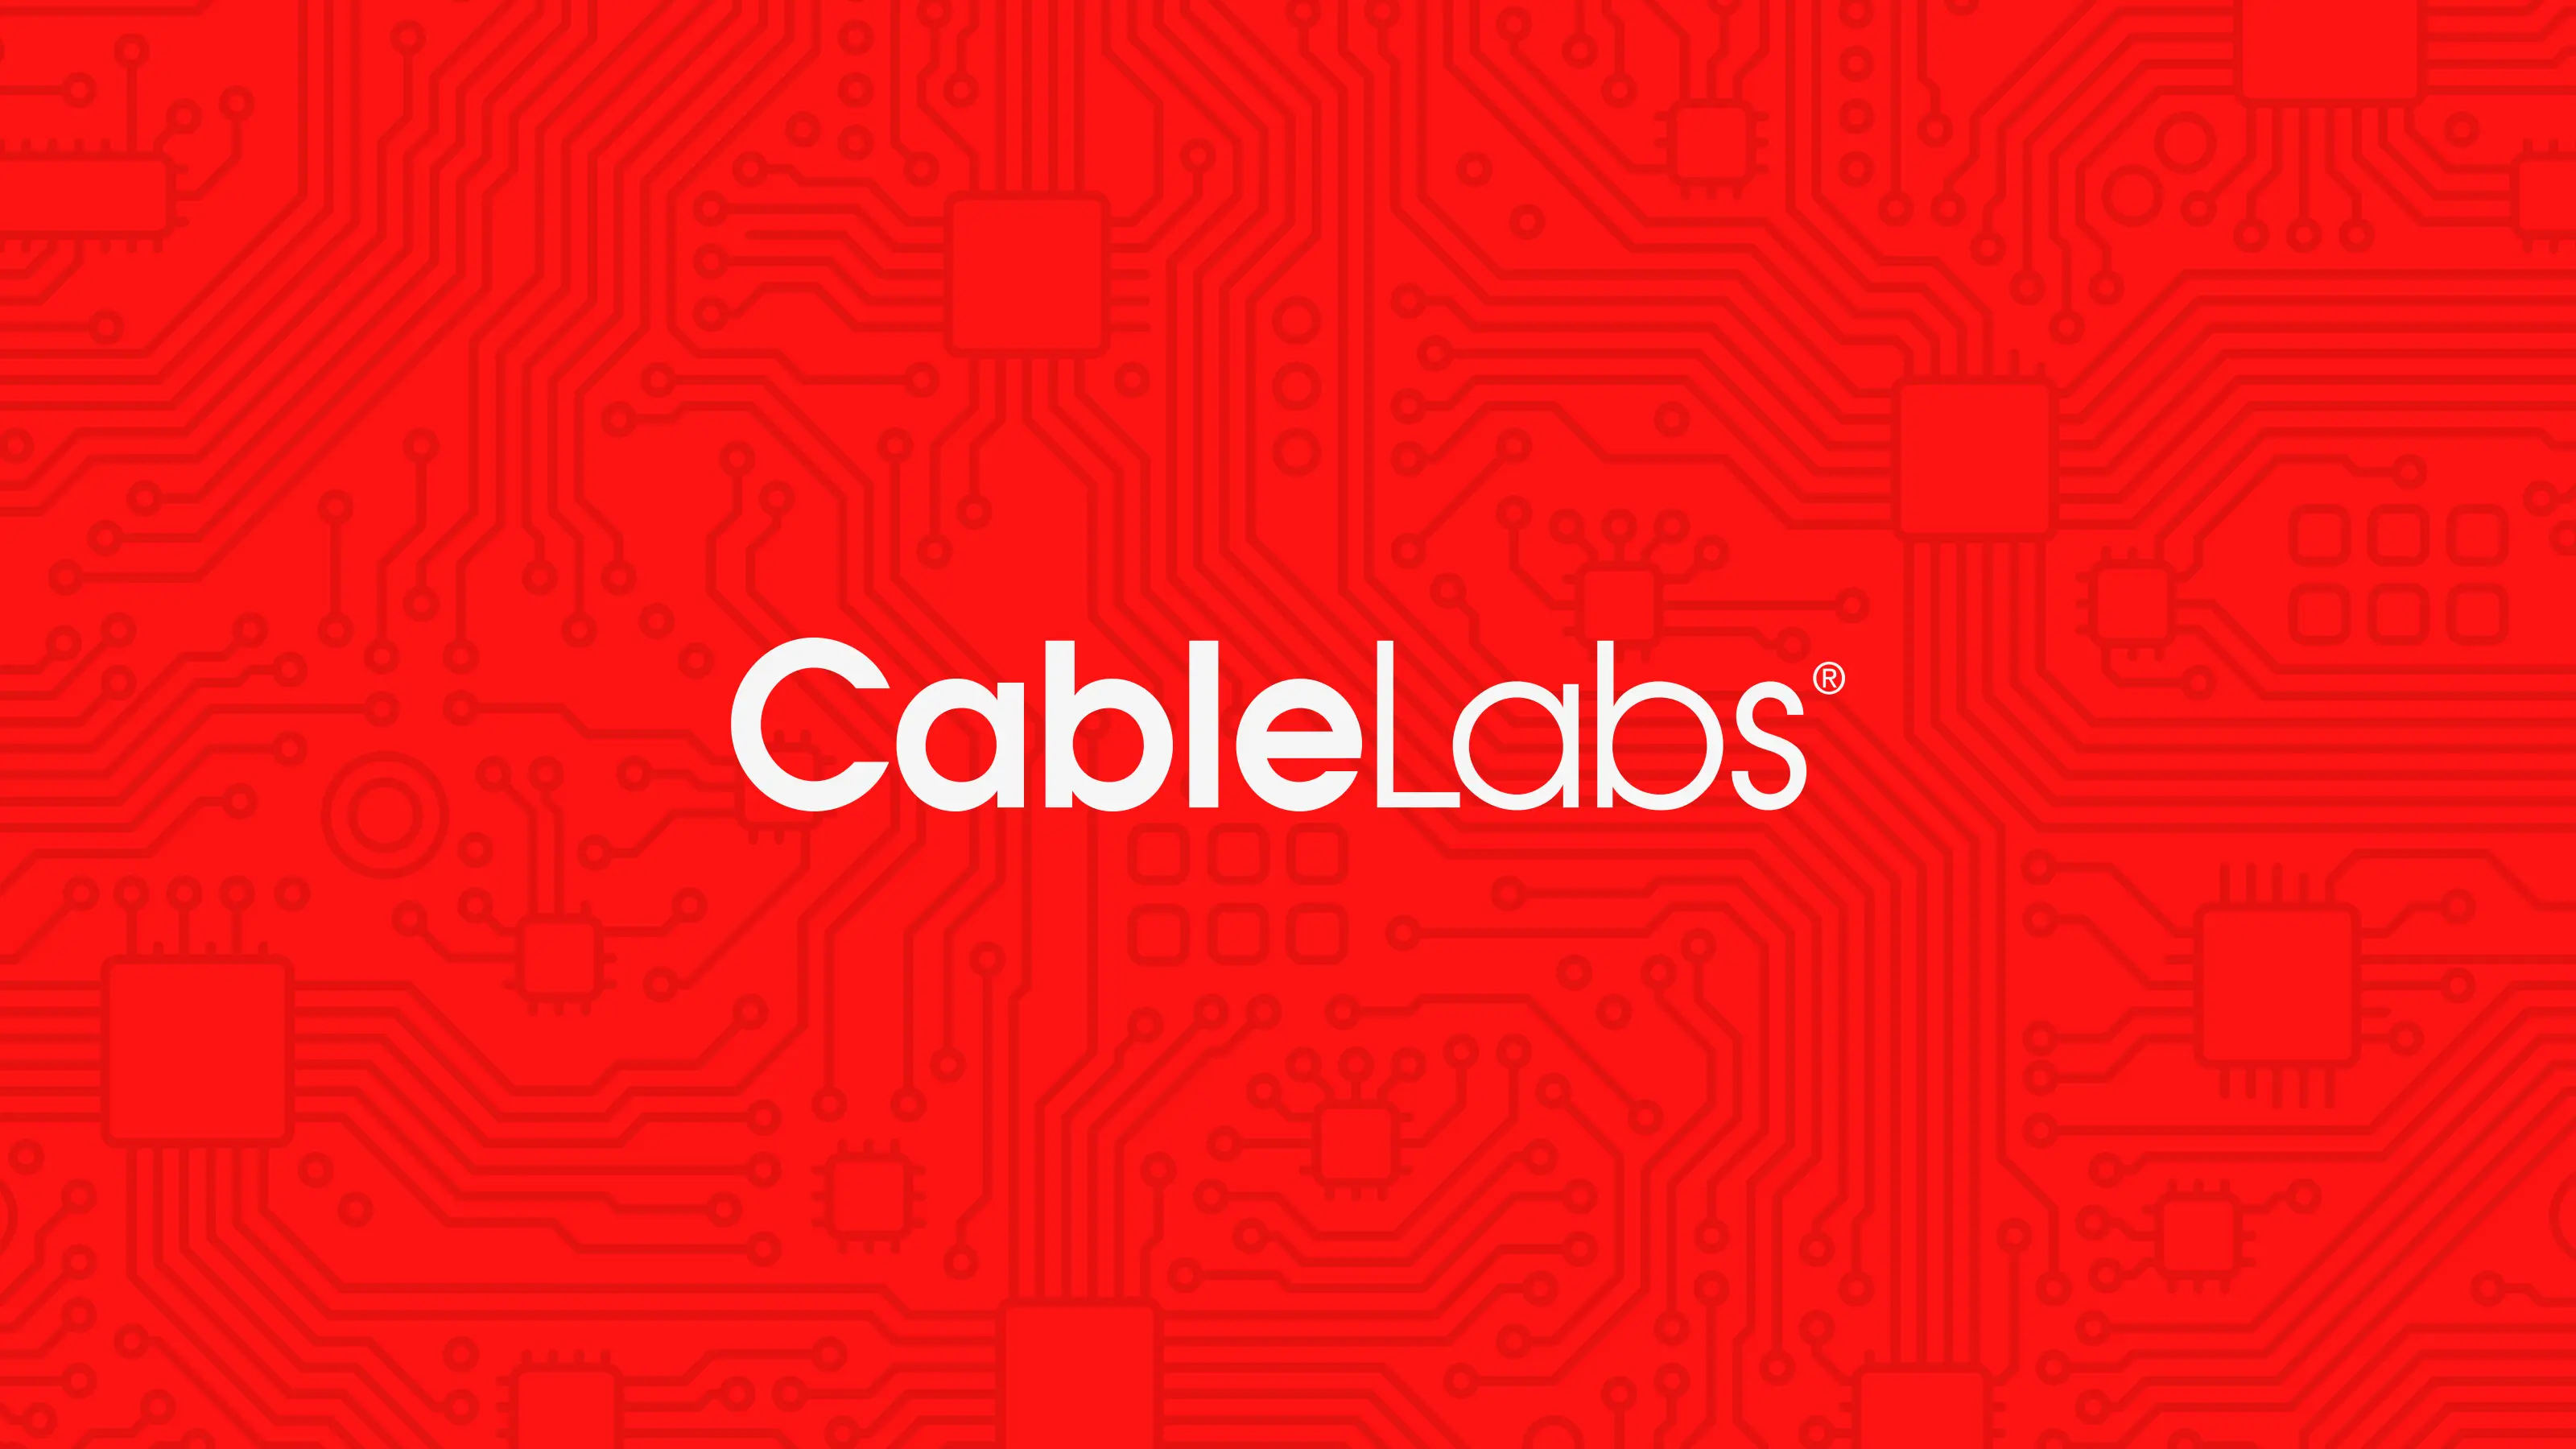 The CableLabs logo with a red background pattern of computer part illustrations.